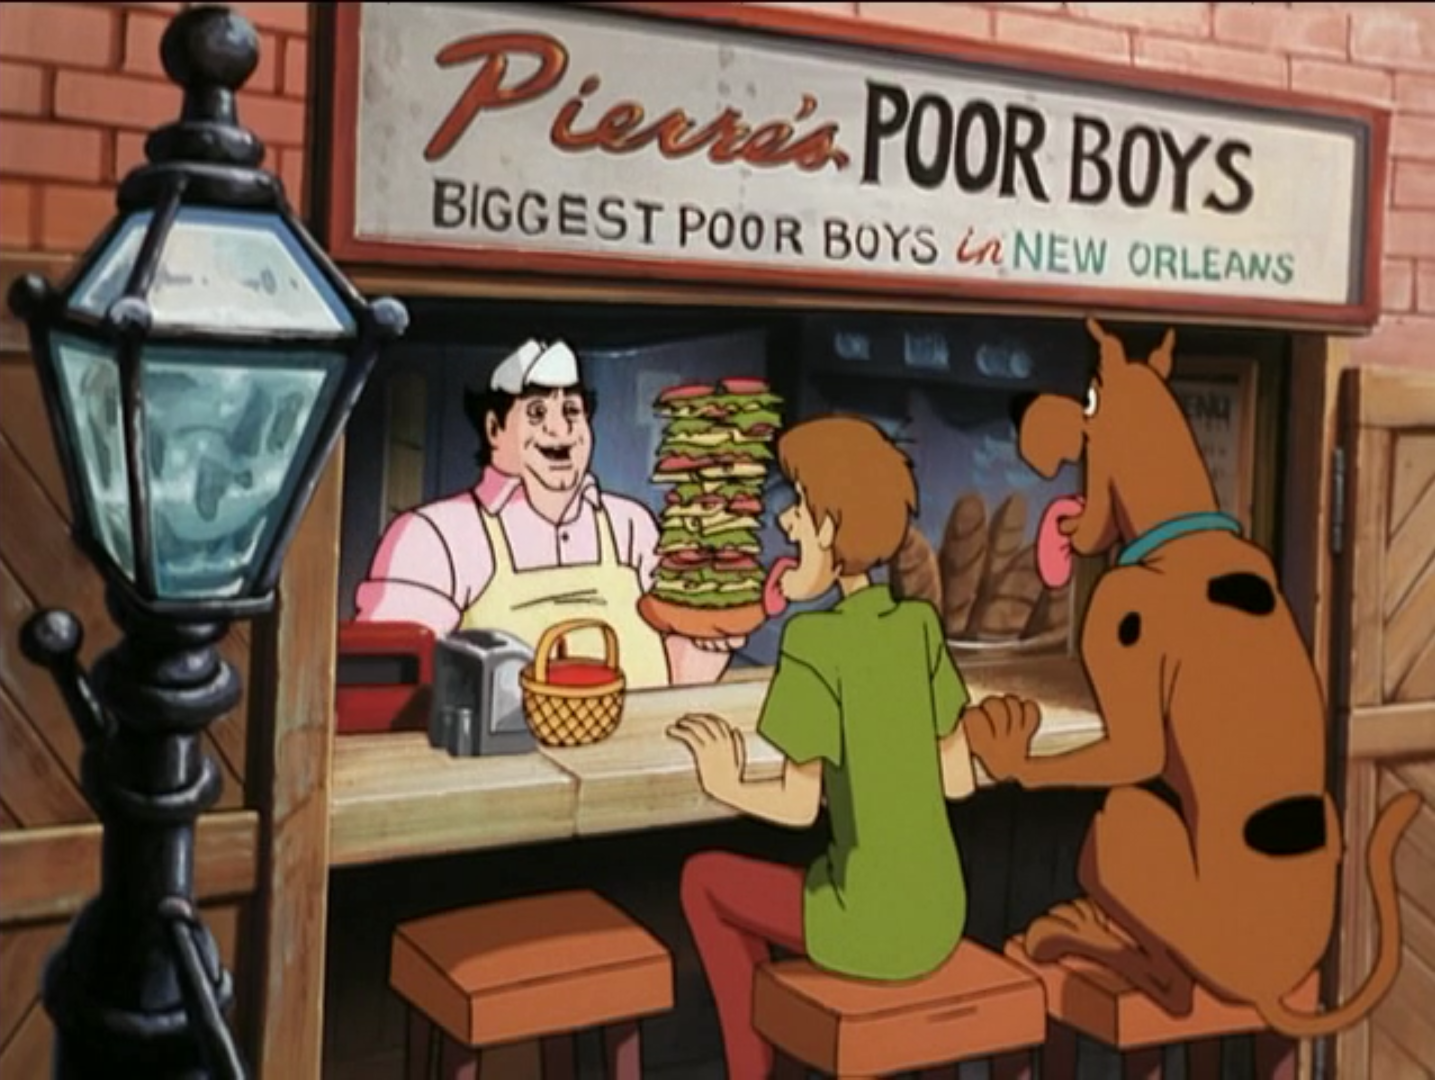 https://static.wikia.nocookie.net/scoobydoo/images/b/bd/Pierre%27s_Poor_Boys.png/revision/latest?cb=20140902115834